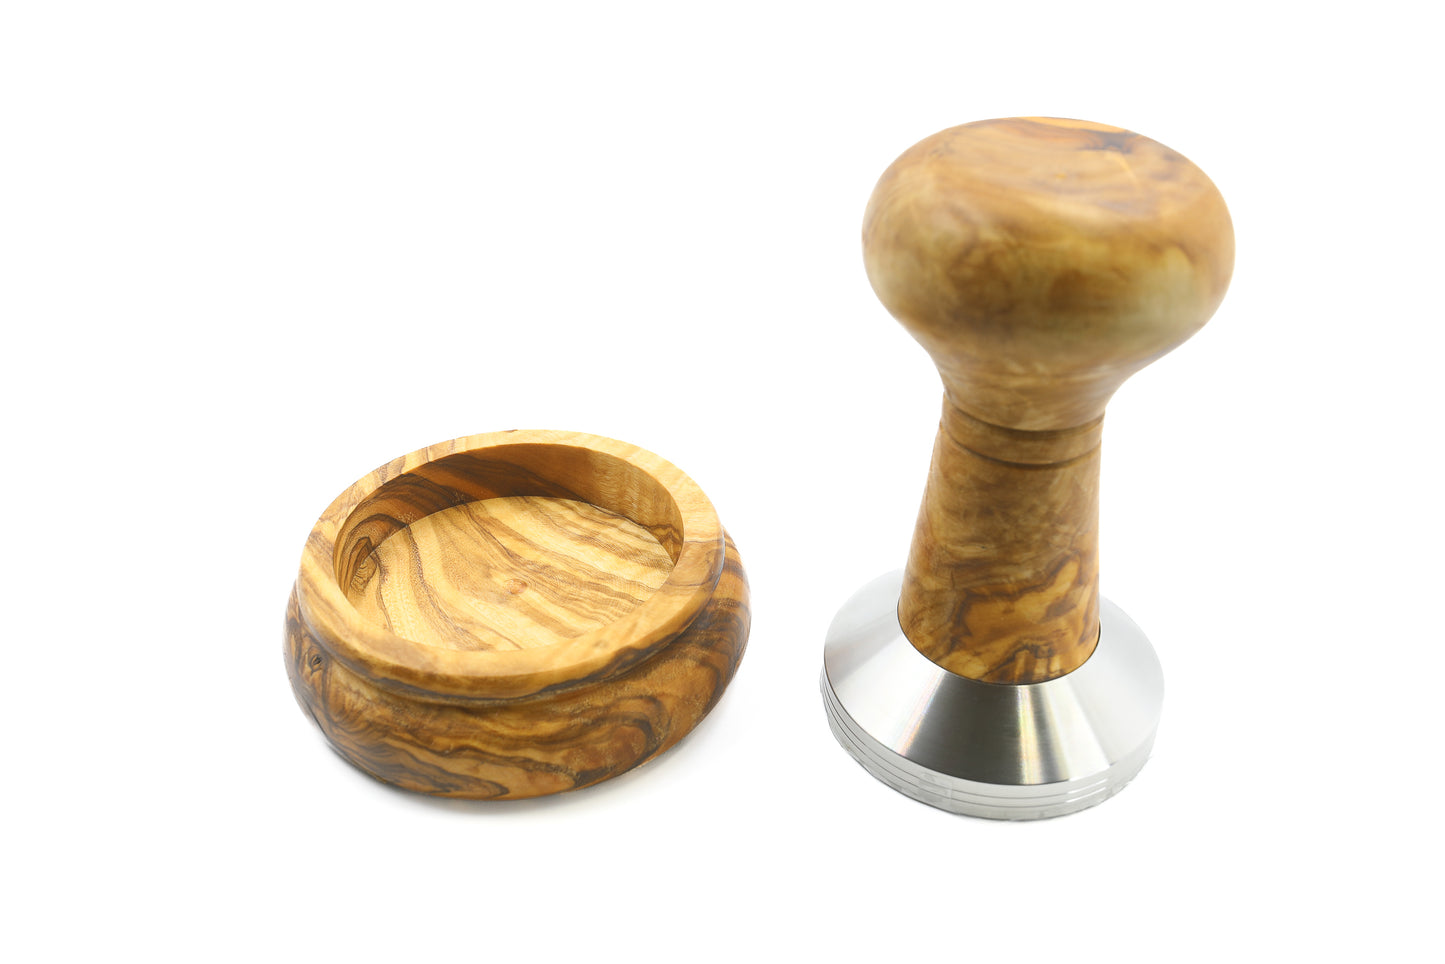 Elegant and practical coffee tamper made from olive wood and stainless steel with a holder